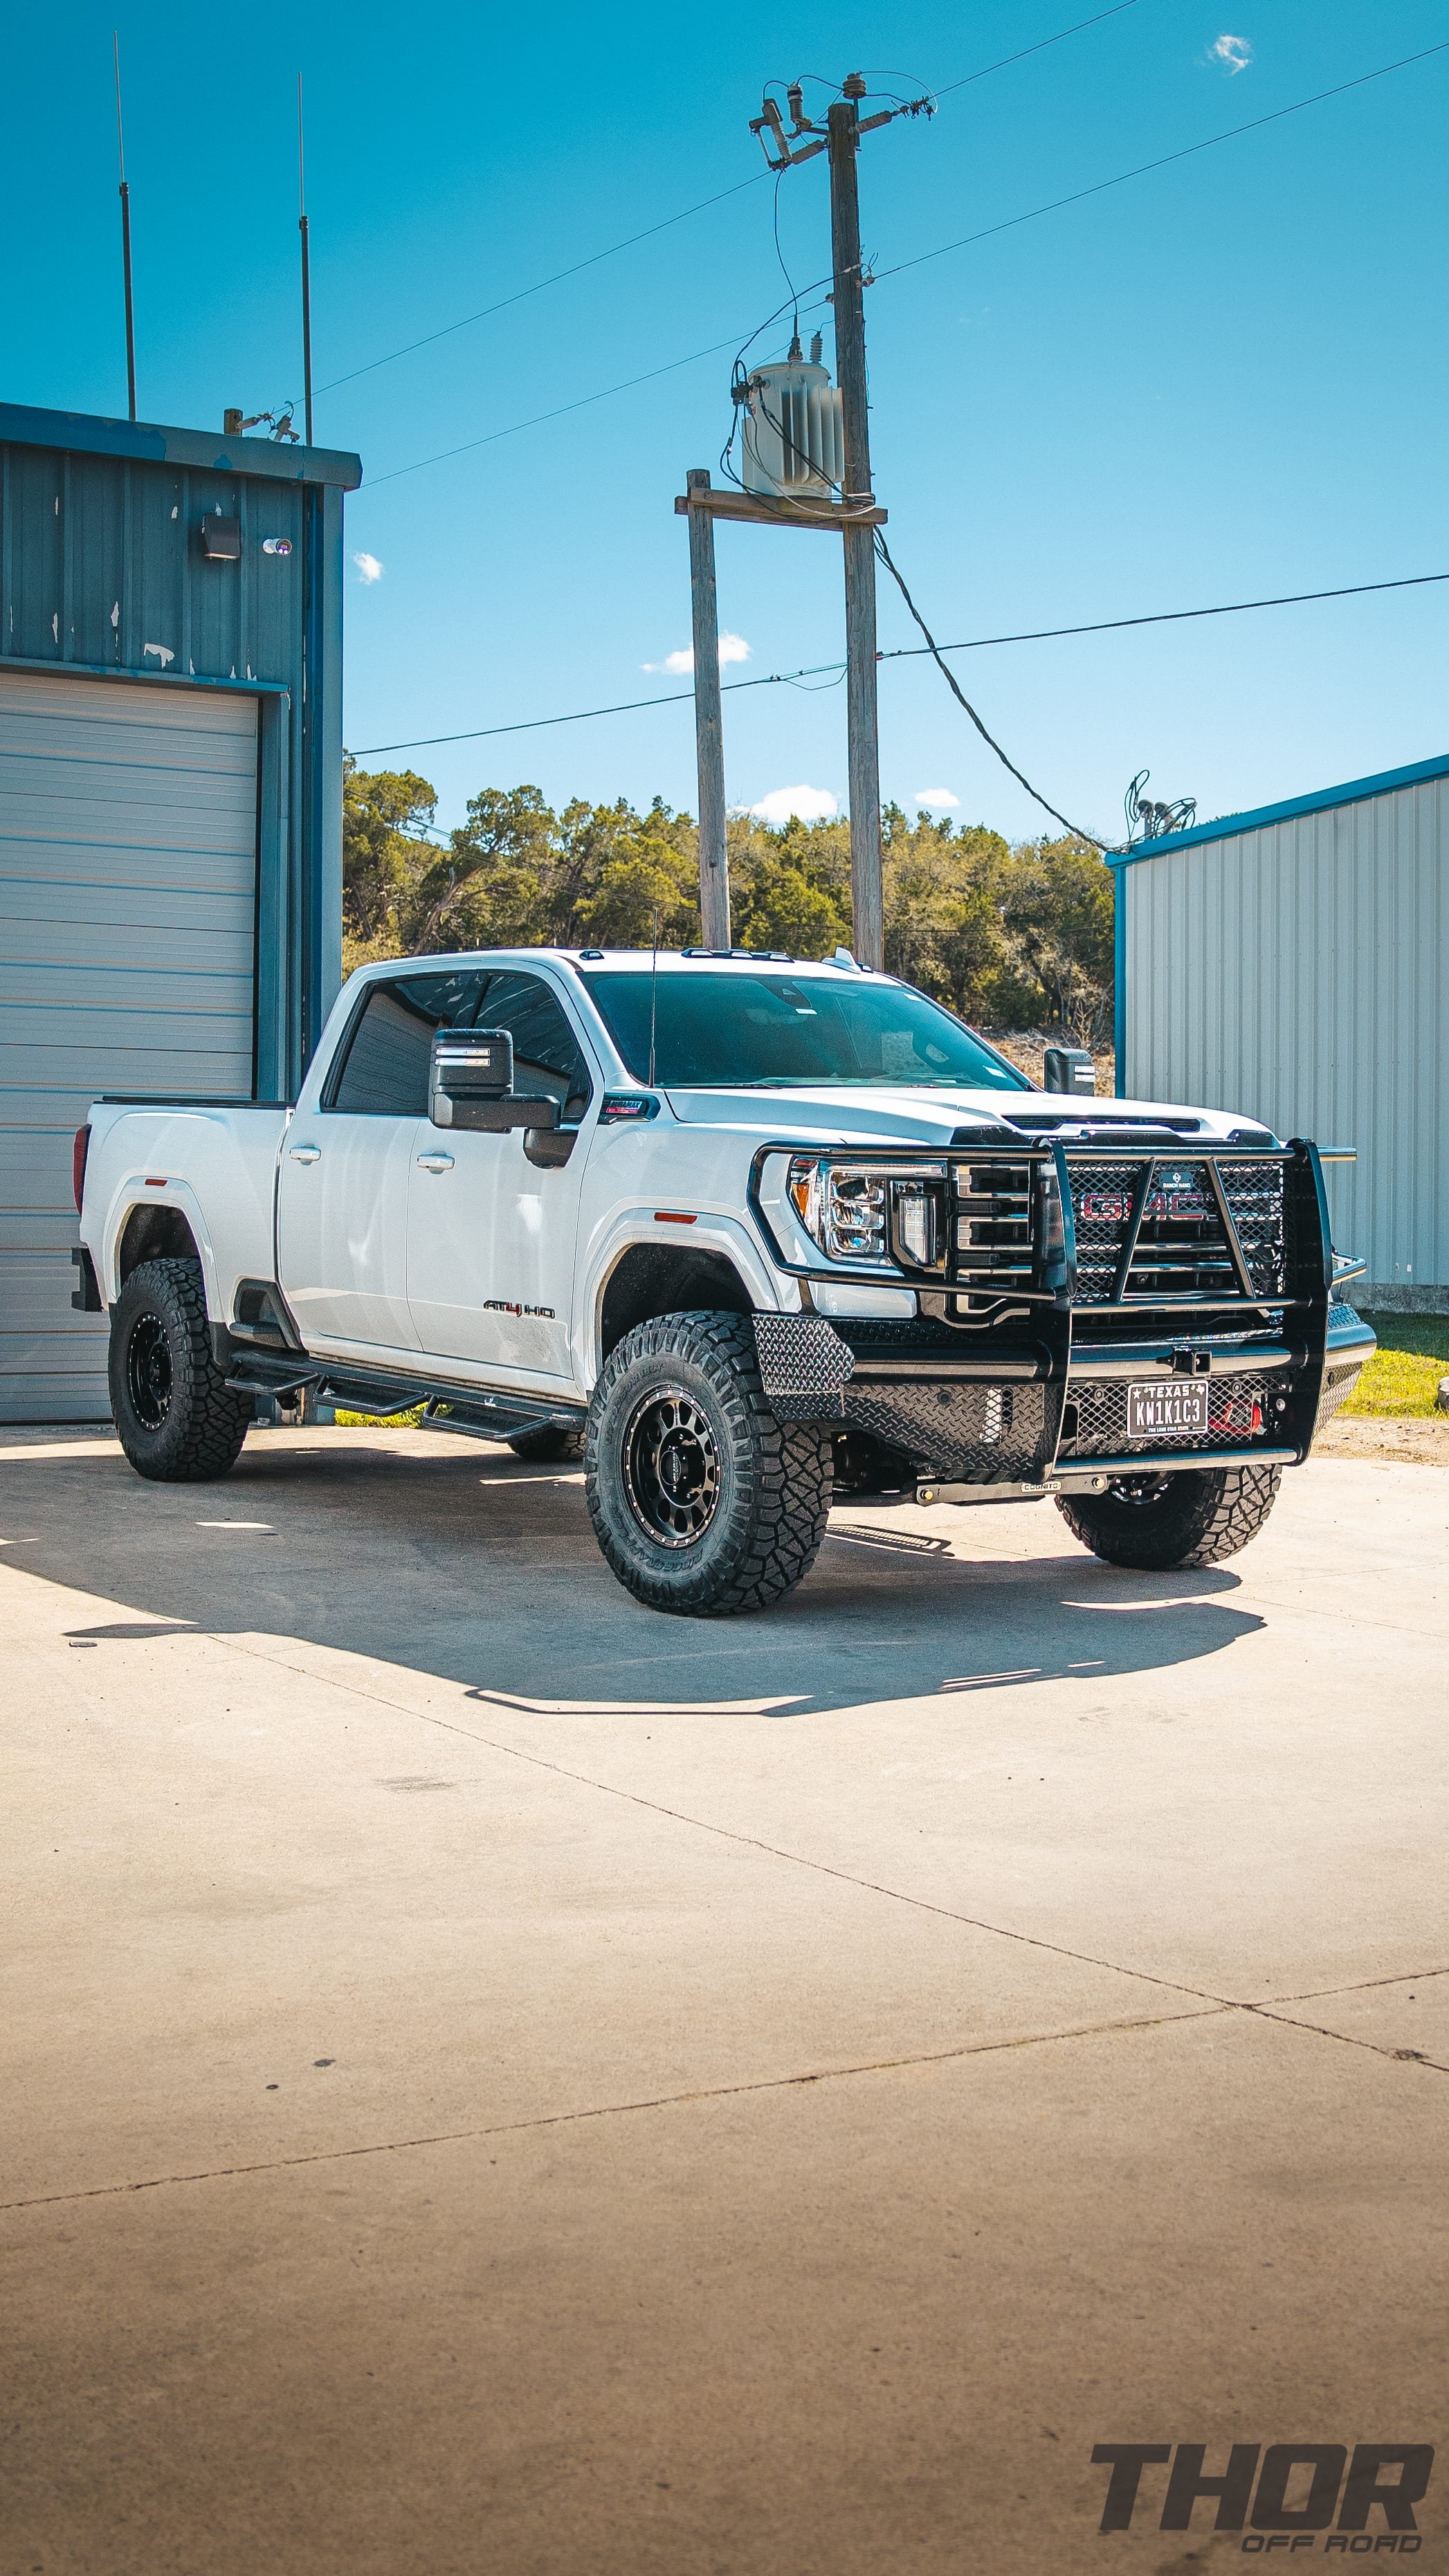 2022 GMC Sierra 2500 HD AT4 in White with 4" Cognito Performance Suspension Kit, 18" Method MR315 Wheels, 37x12.50R18 Nitto Ridge Grappler Tires, Ranch Hand Legend Front Bumper, Ranch Hand Legend Rear Bumper, Ranch Hand Wheel to Wheel Steps